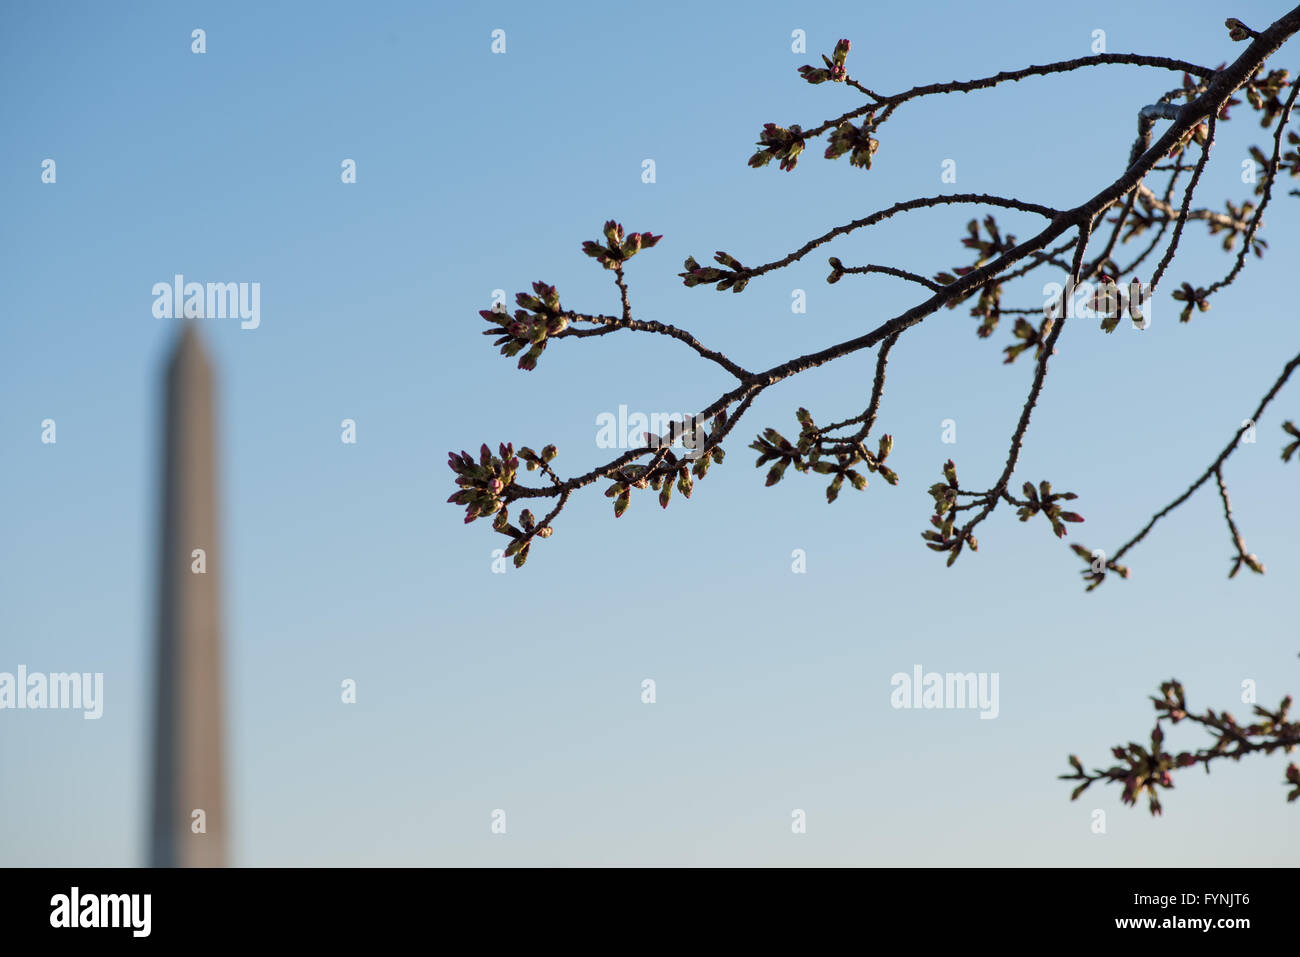 WASHINGTON DC, United States - Some early cherry blossom buds with the Washington Monument in the background. Stock Photo